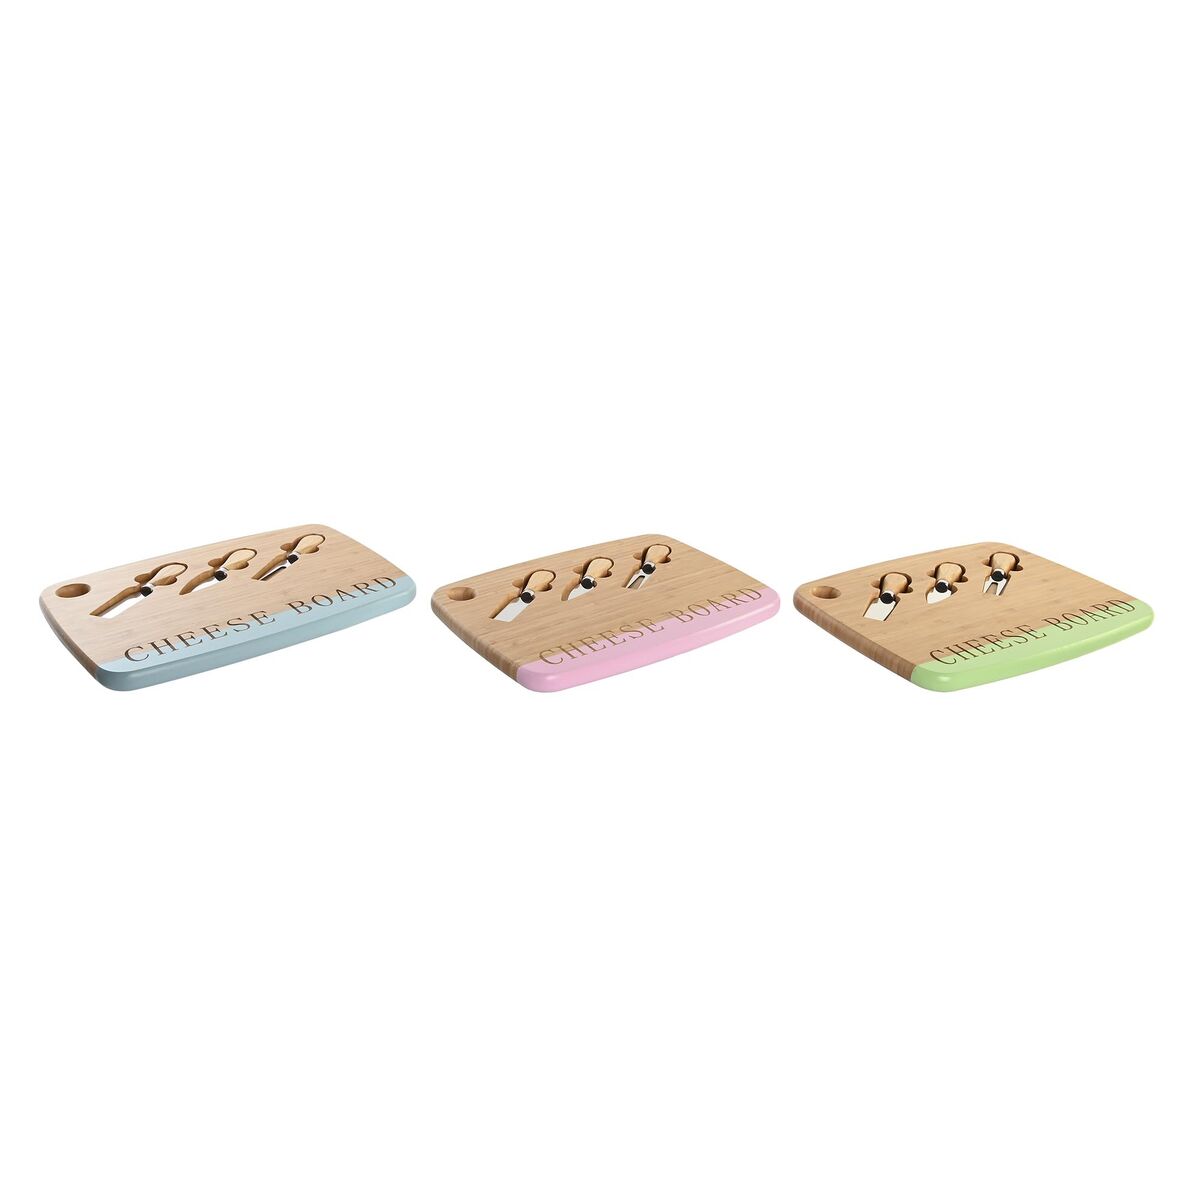 Cheeseboard DKD Home Decor 33,5 x 24 x 2 cm Blue Pink Stainless steel Green (3 Pieces)